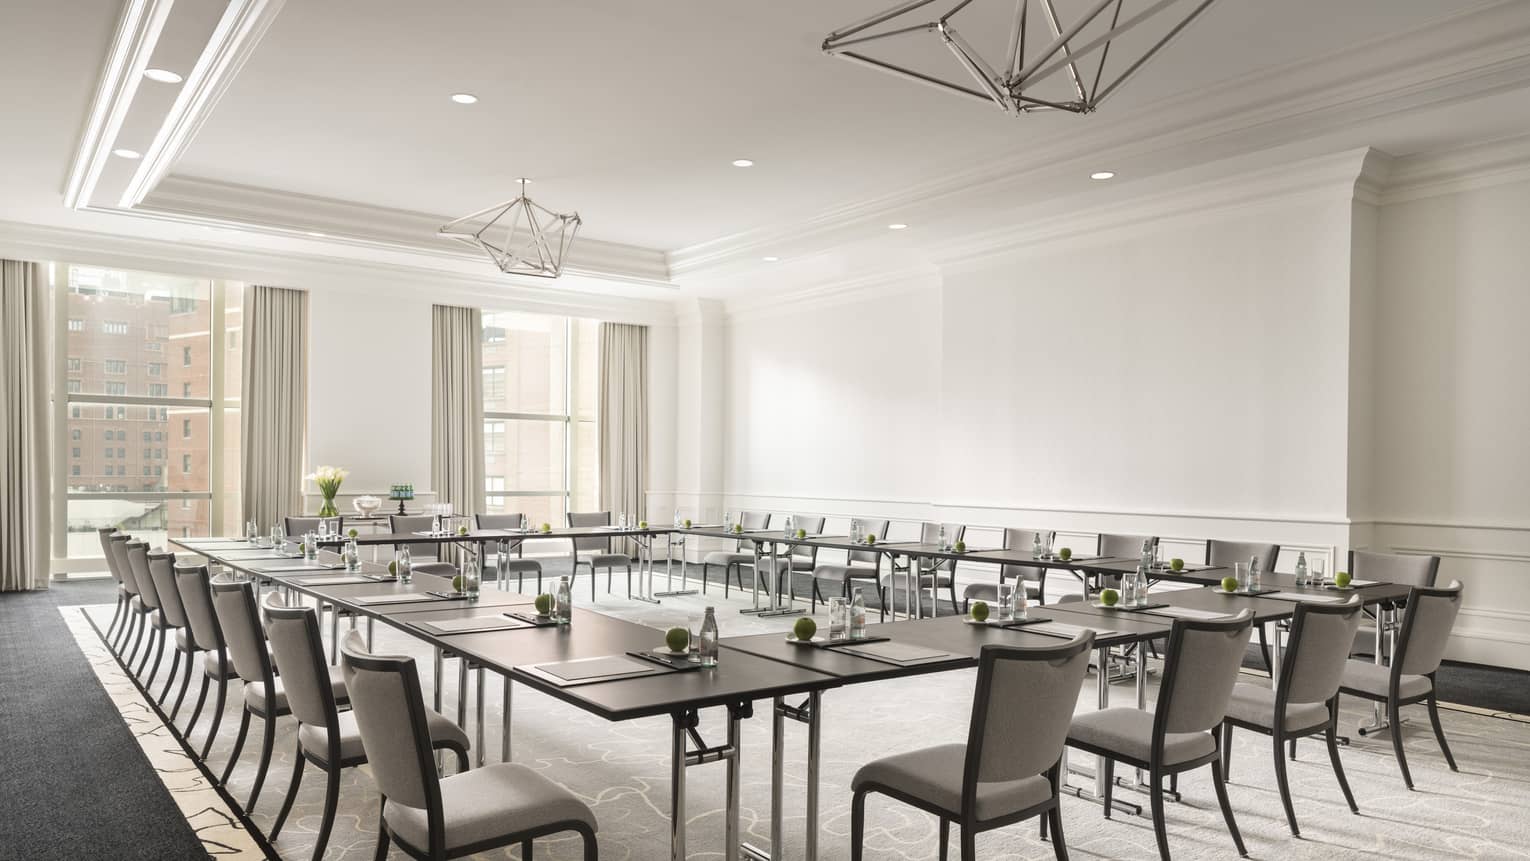 White conference room with dark tables in boardroom-style seating